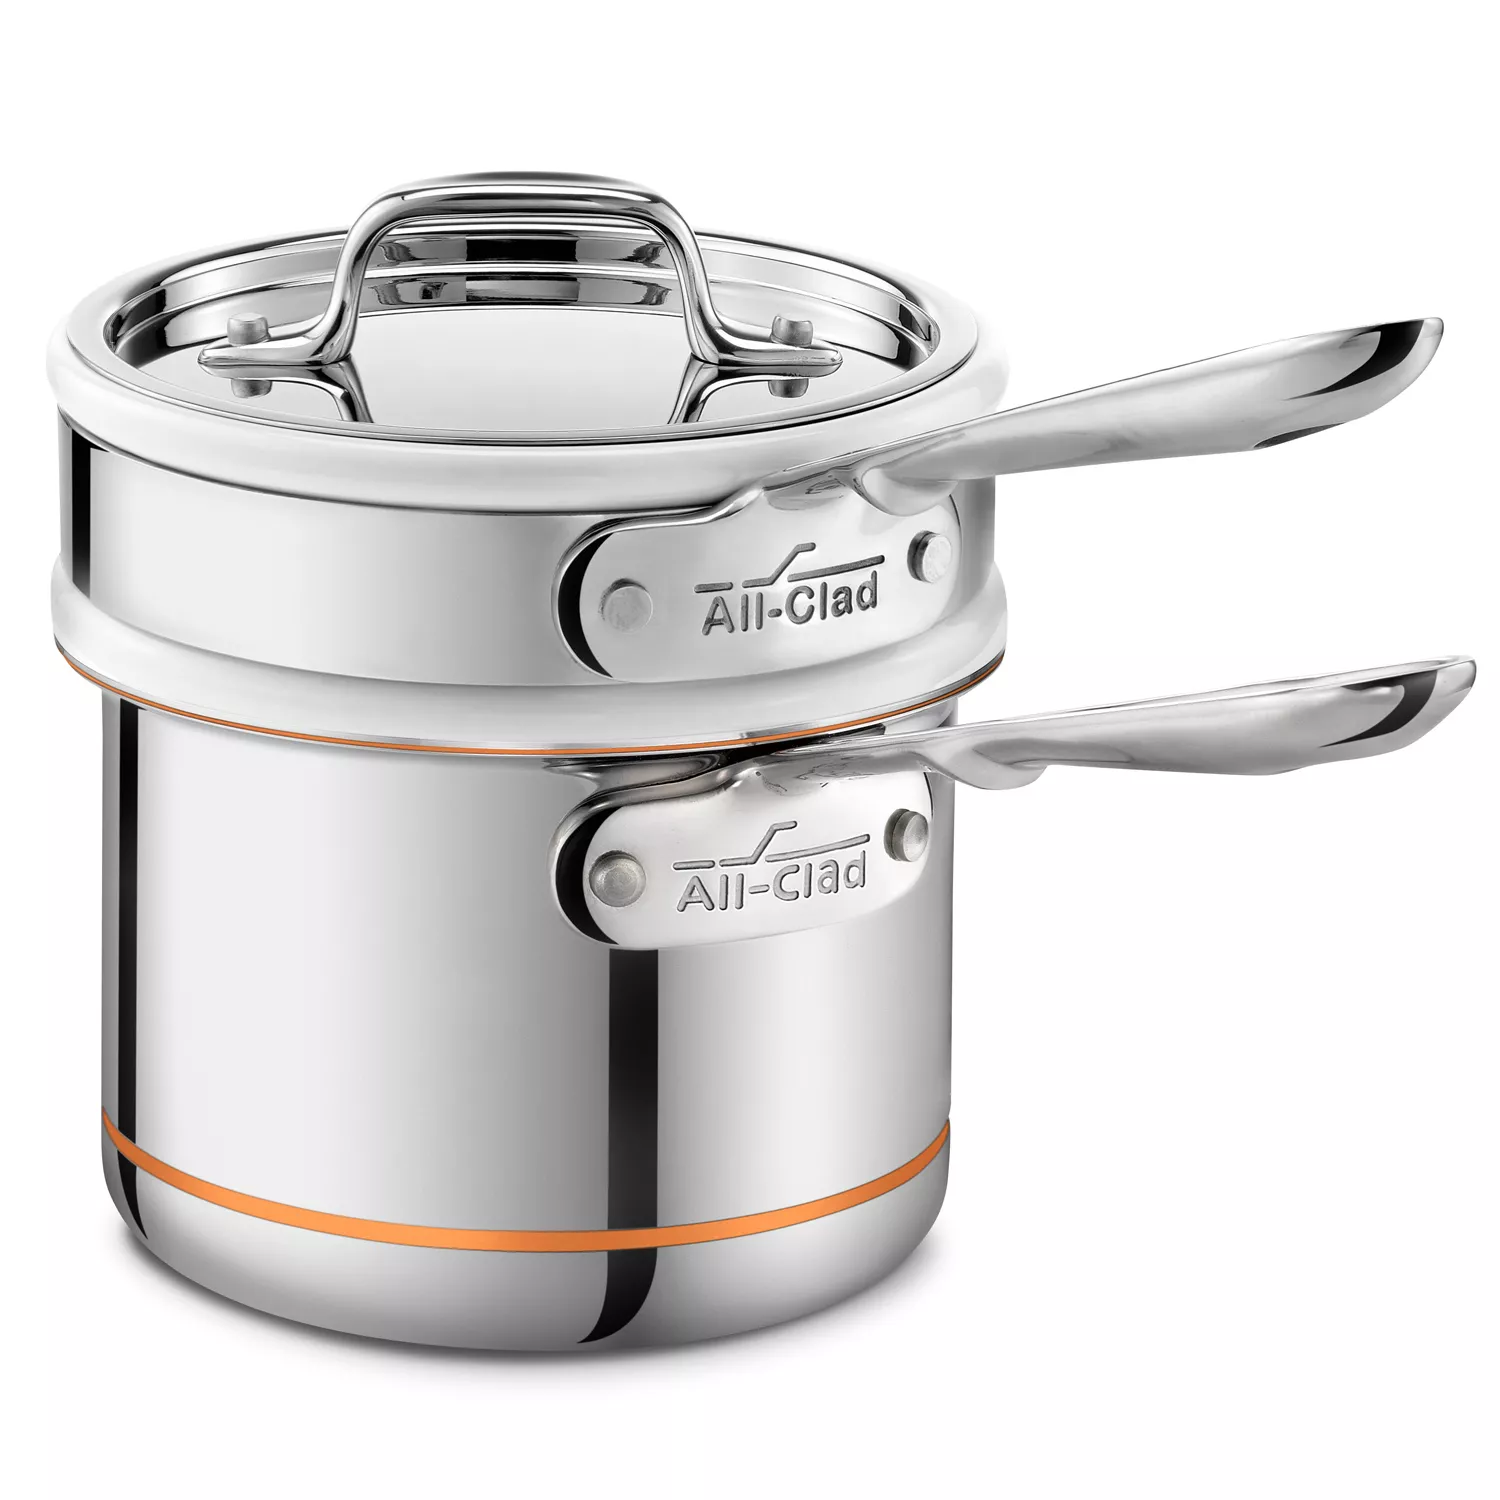 Our Table™ Stainless Steel Covered Double Boiler, 2 Qt - Fry's Food Stores